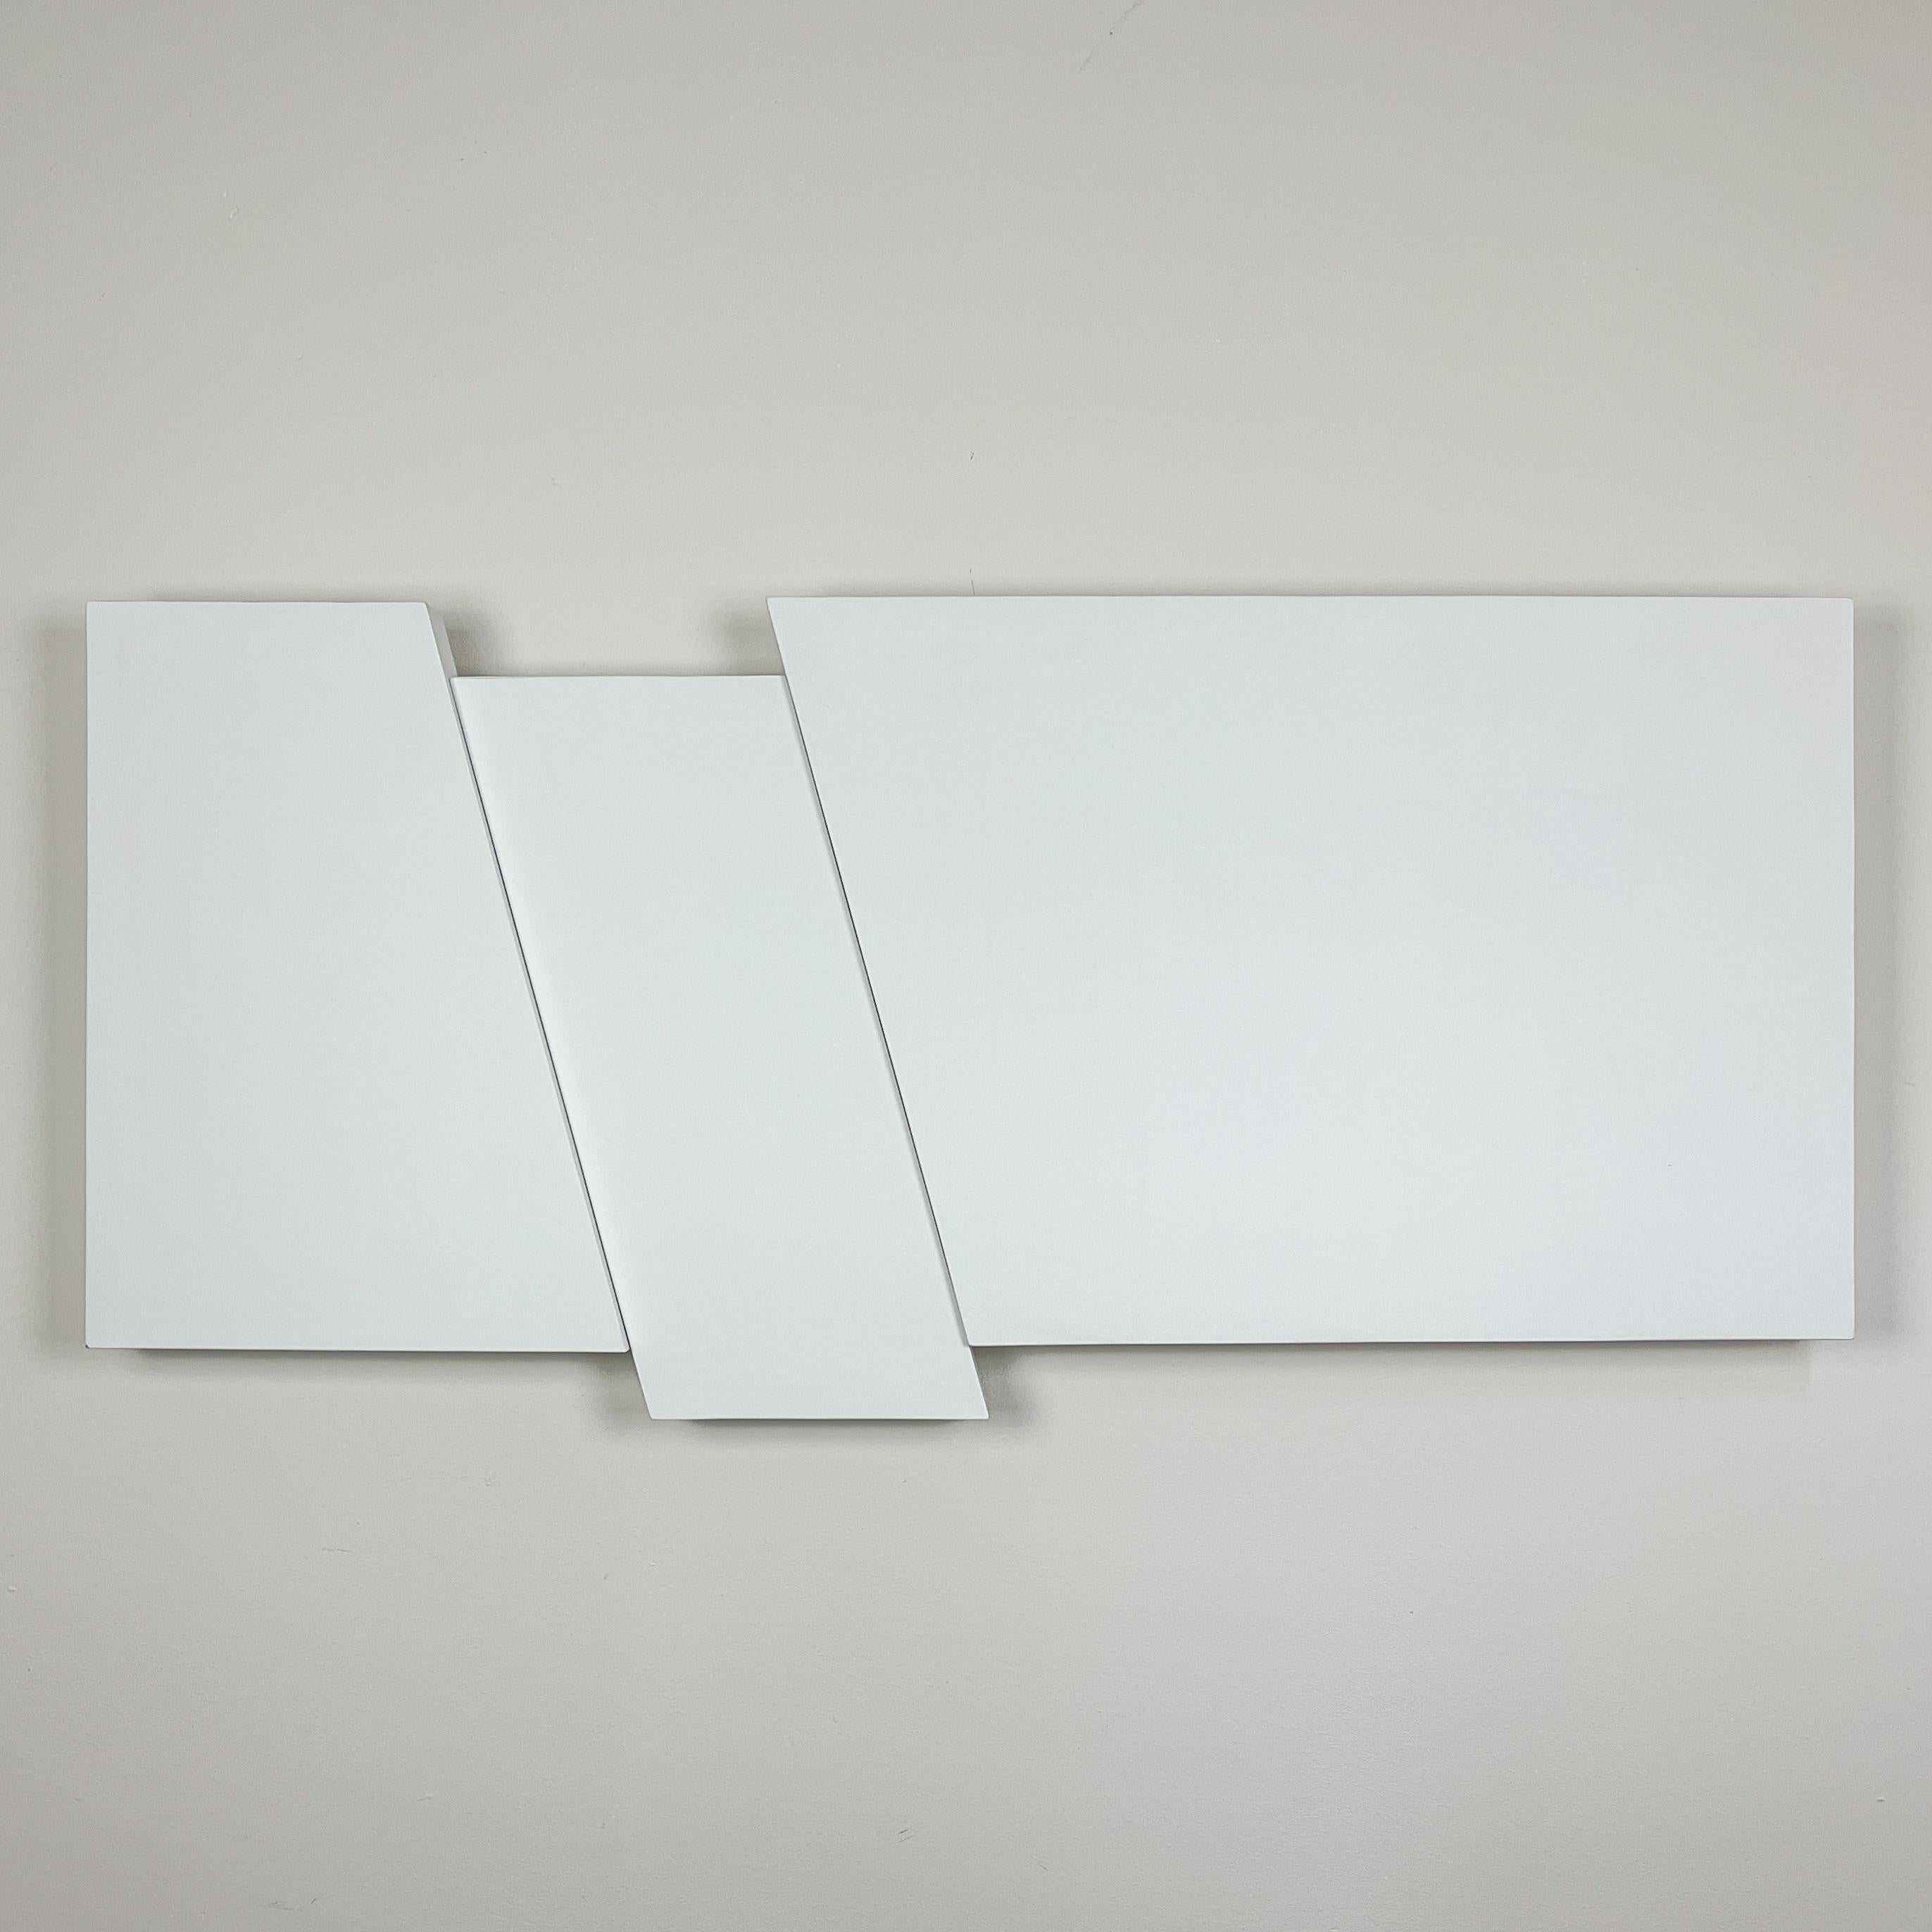 An original Minimalist artwork / wall relief, “Relief in white no. 63”. Sculpted by Swedish artist Lars-Erik Falk in 1981. 

The relief consists of three separate parts. The middle section staggers on both the horizontal and vertical planes and is